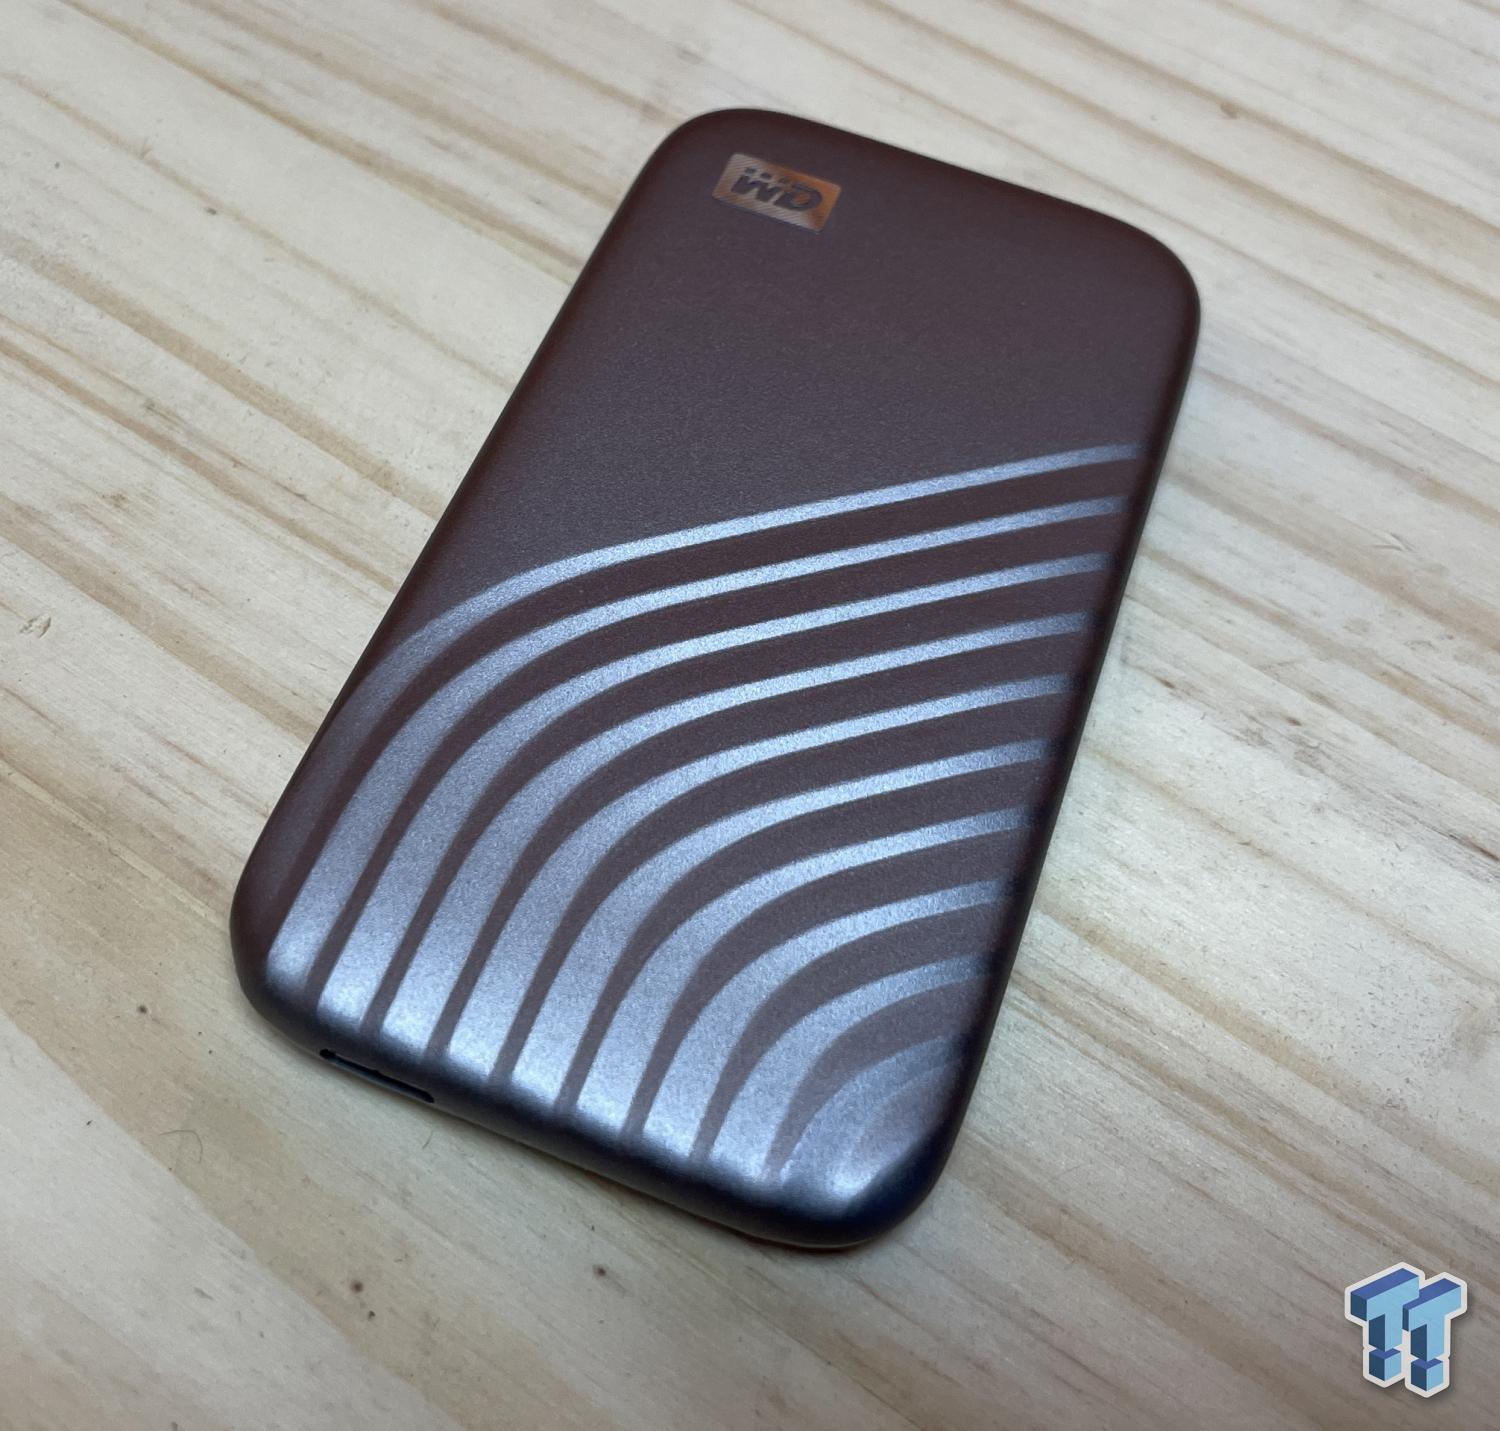 WD My Passport SSD 4TB Portable SSD Review